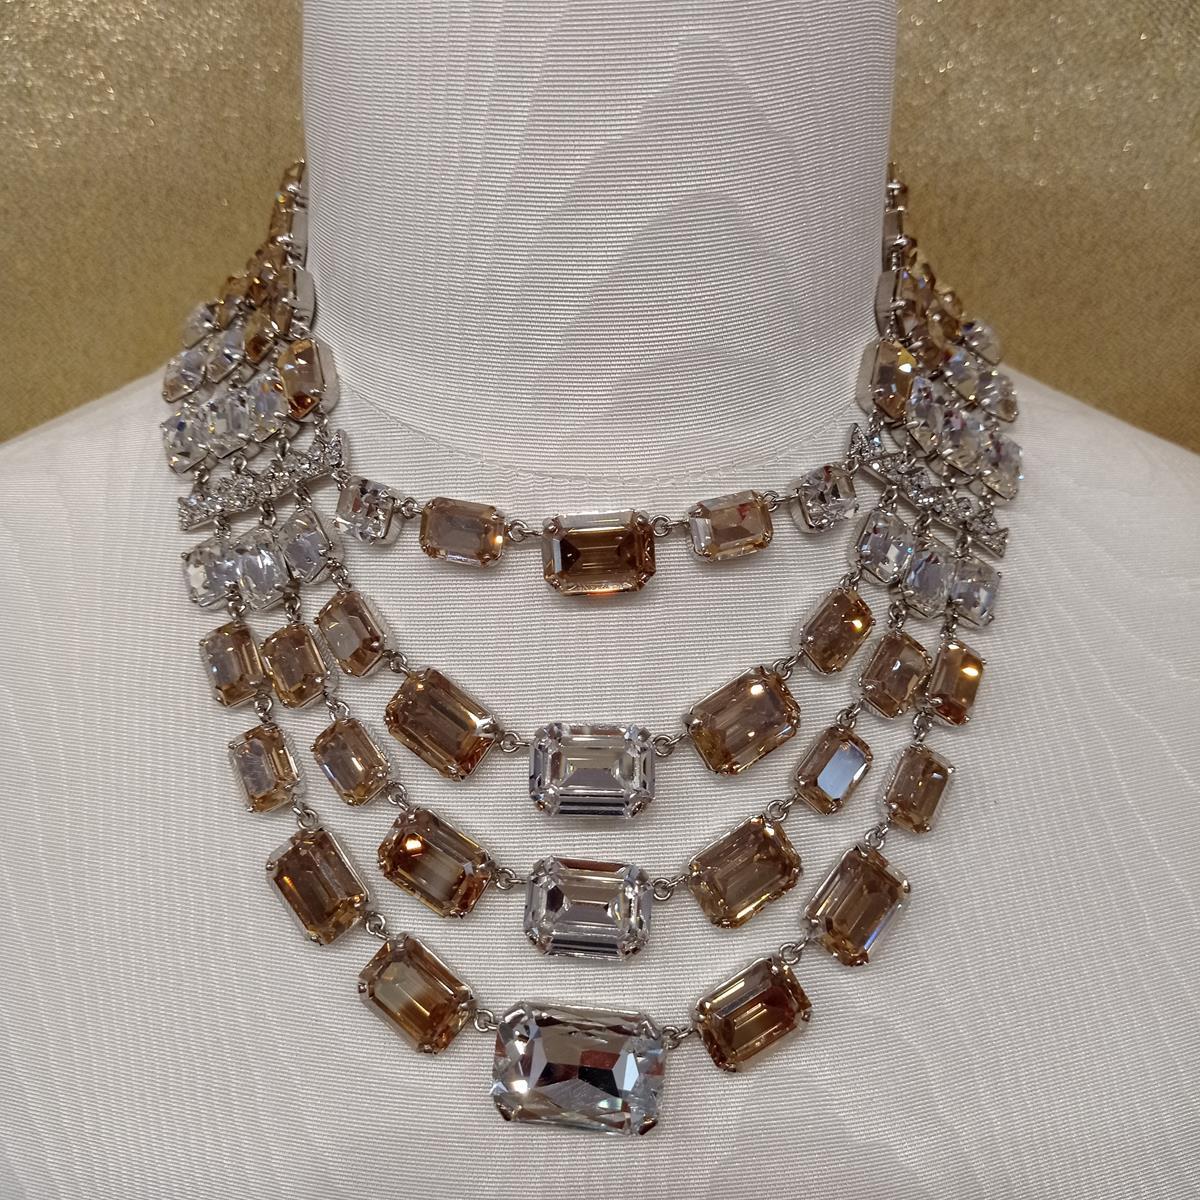 Fantastic masterpiece by Carlo Zini
One of the world greatest bijoux designers
Three lines
Champagne and white crystals
Non allergenic rhodium
100% Artisanal work made in Milano
Worldwide express shipping included in the price !